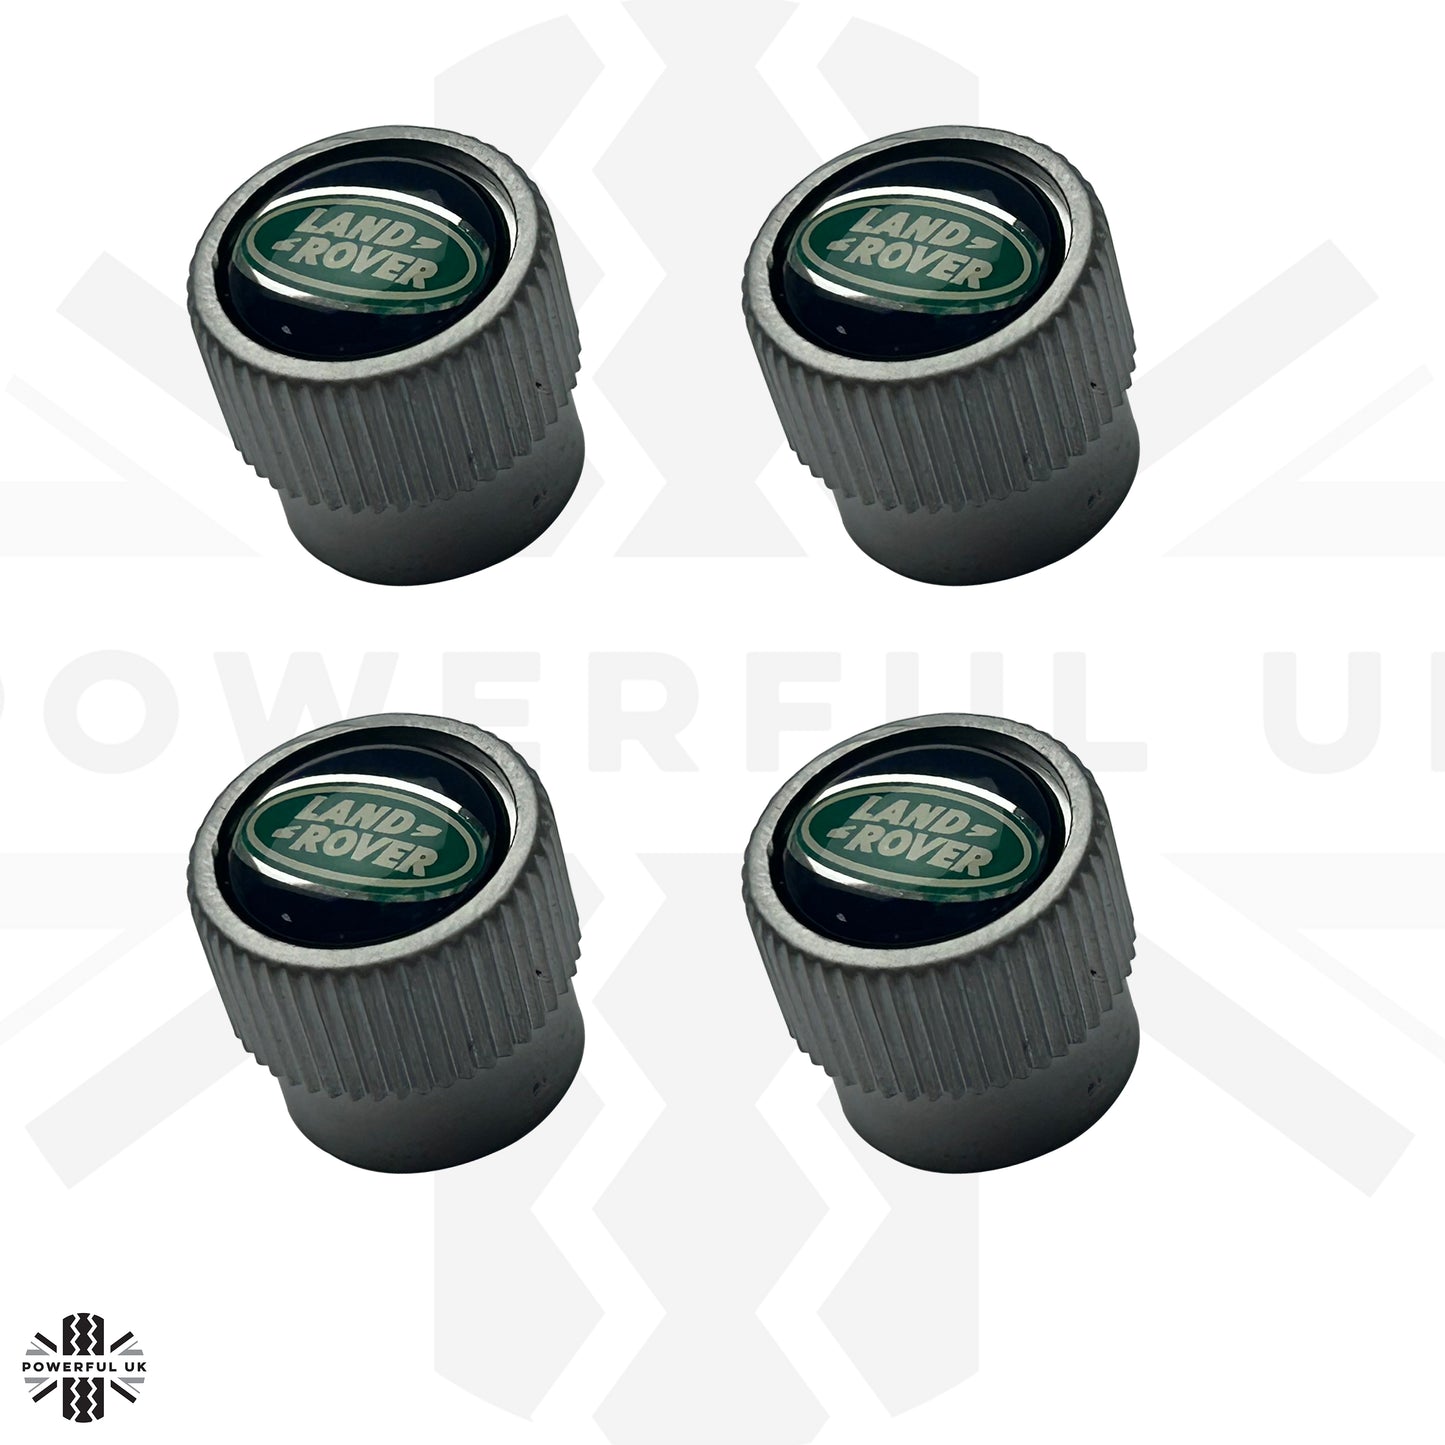 "Land Rover" Dust Valve Caps (4pc) for Land Rover Discovery 3 & 4 - Genuine